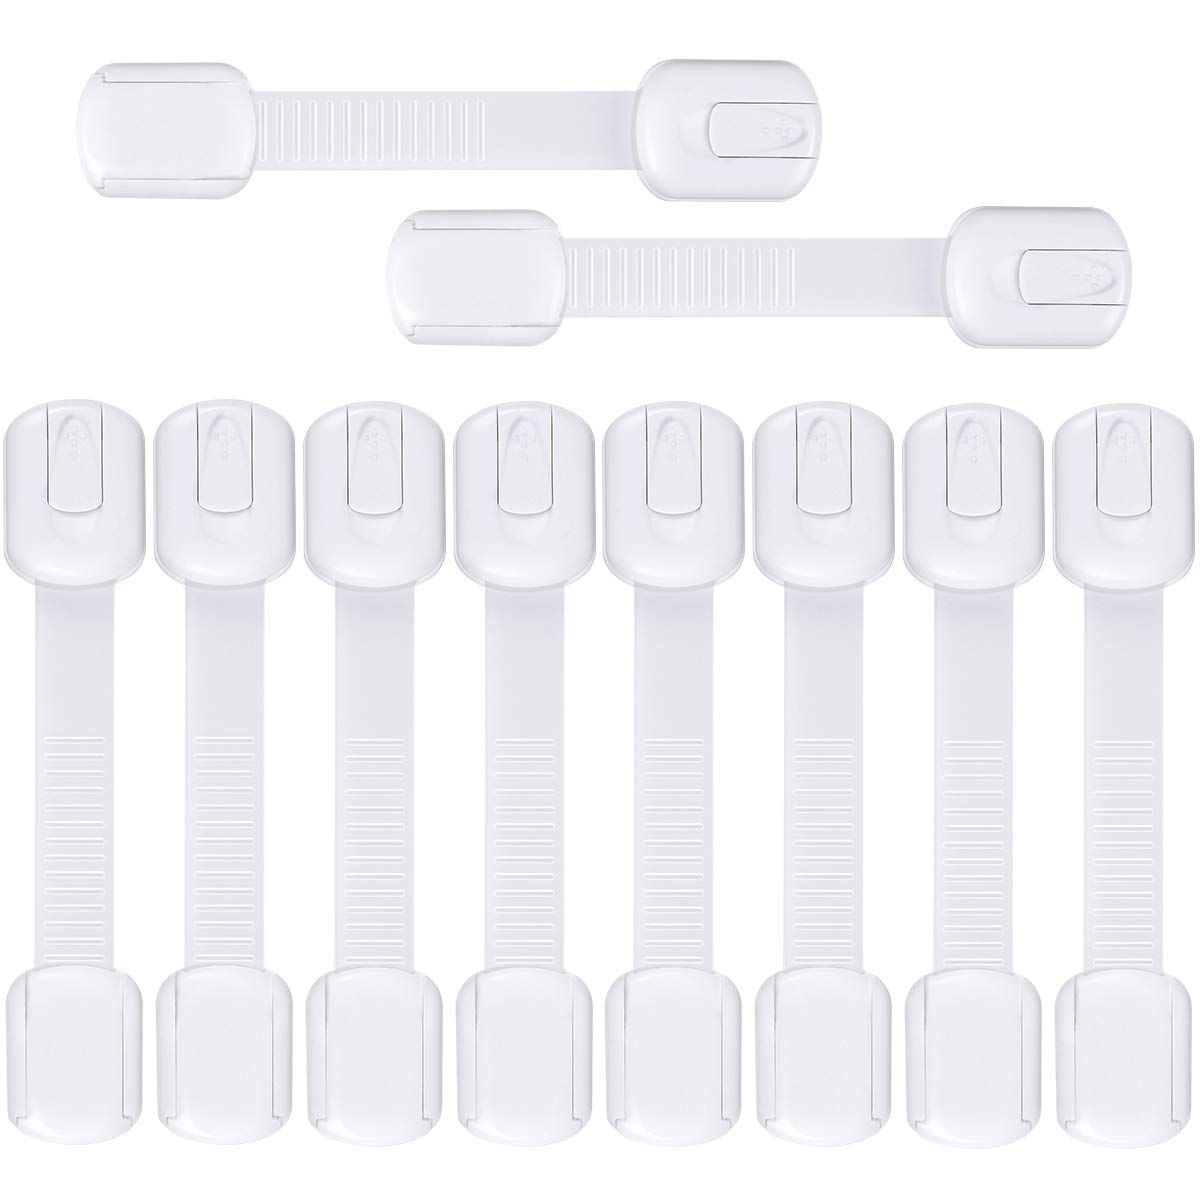 rongrong 10 Pack Child Safety Cupboard Locks, Adjustable Baby Proofing Cabinet Strap Locks with Strong Adhesives for Fridge, Cabinets, Drawers, Dishwasher, Toilet - No Tools Needed No Drilling